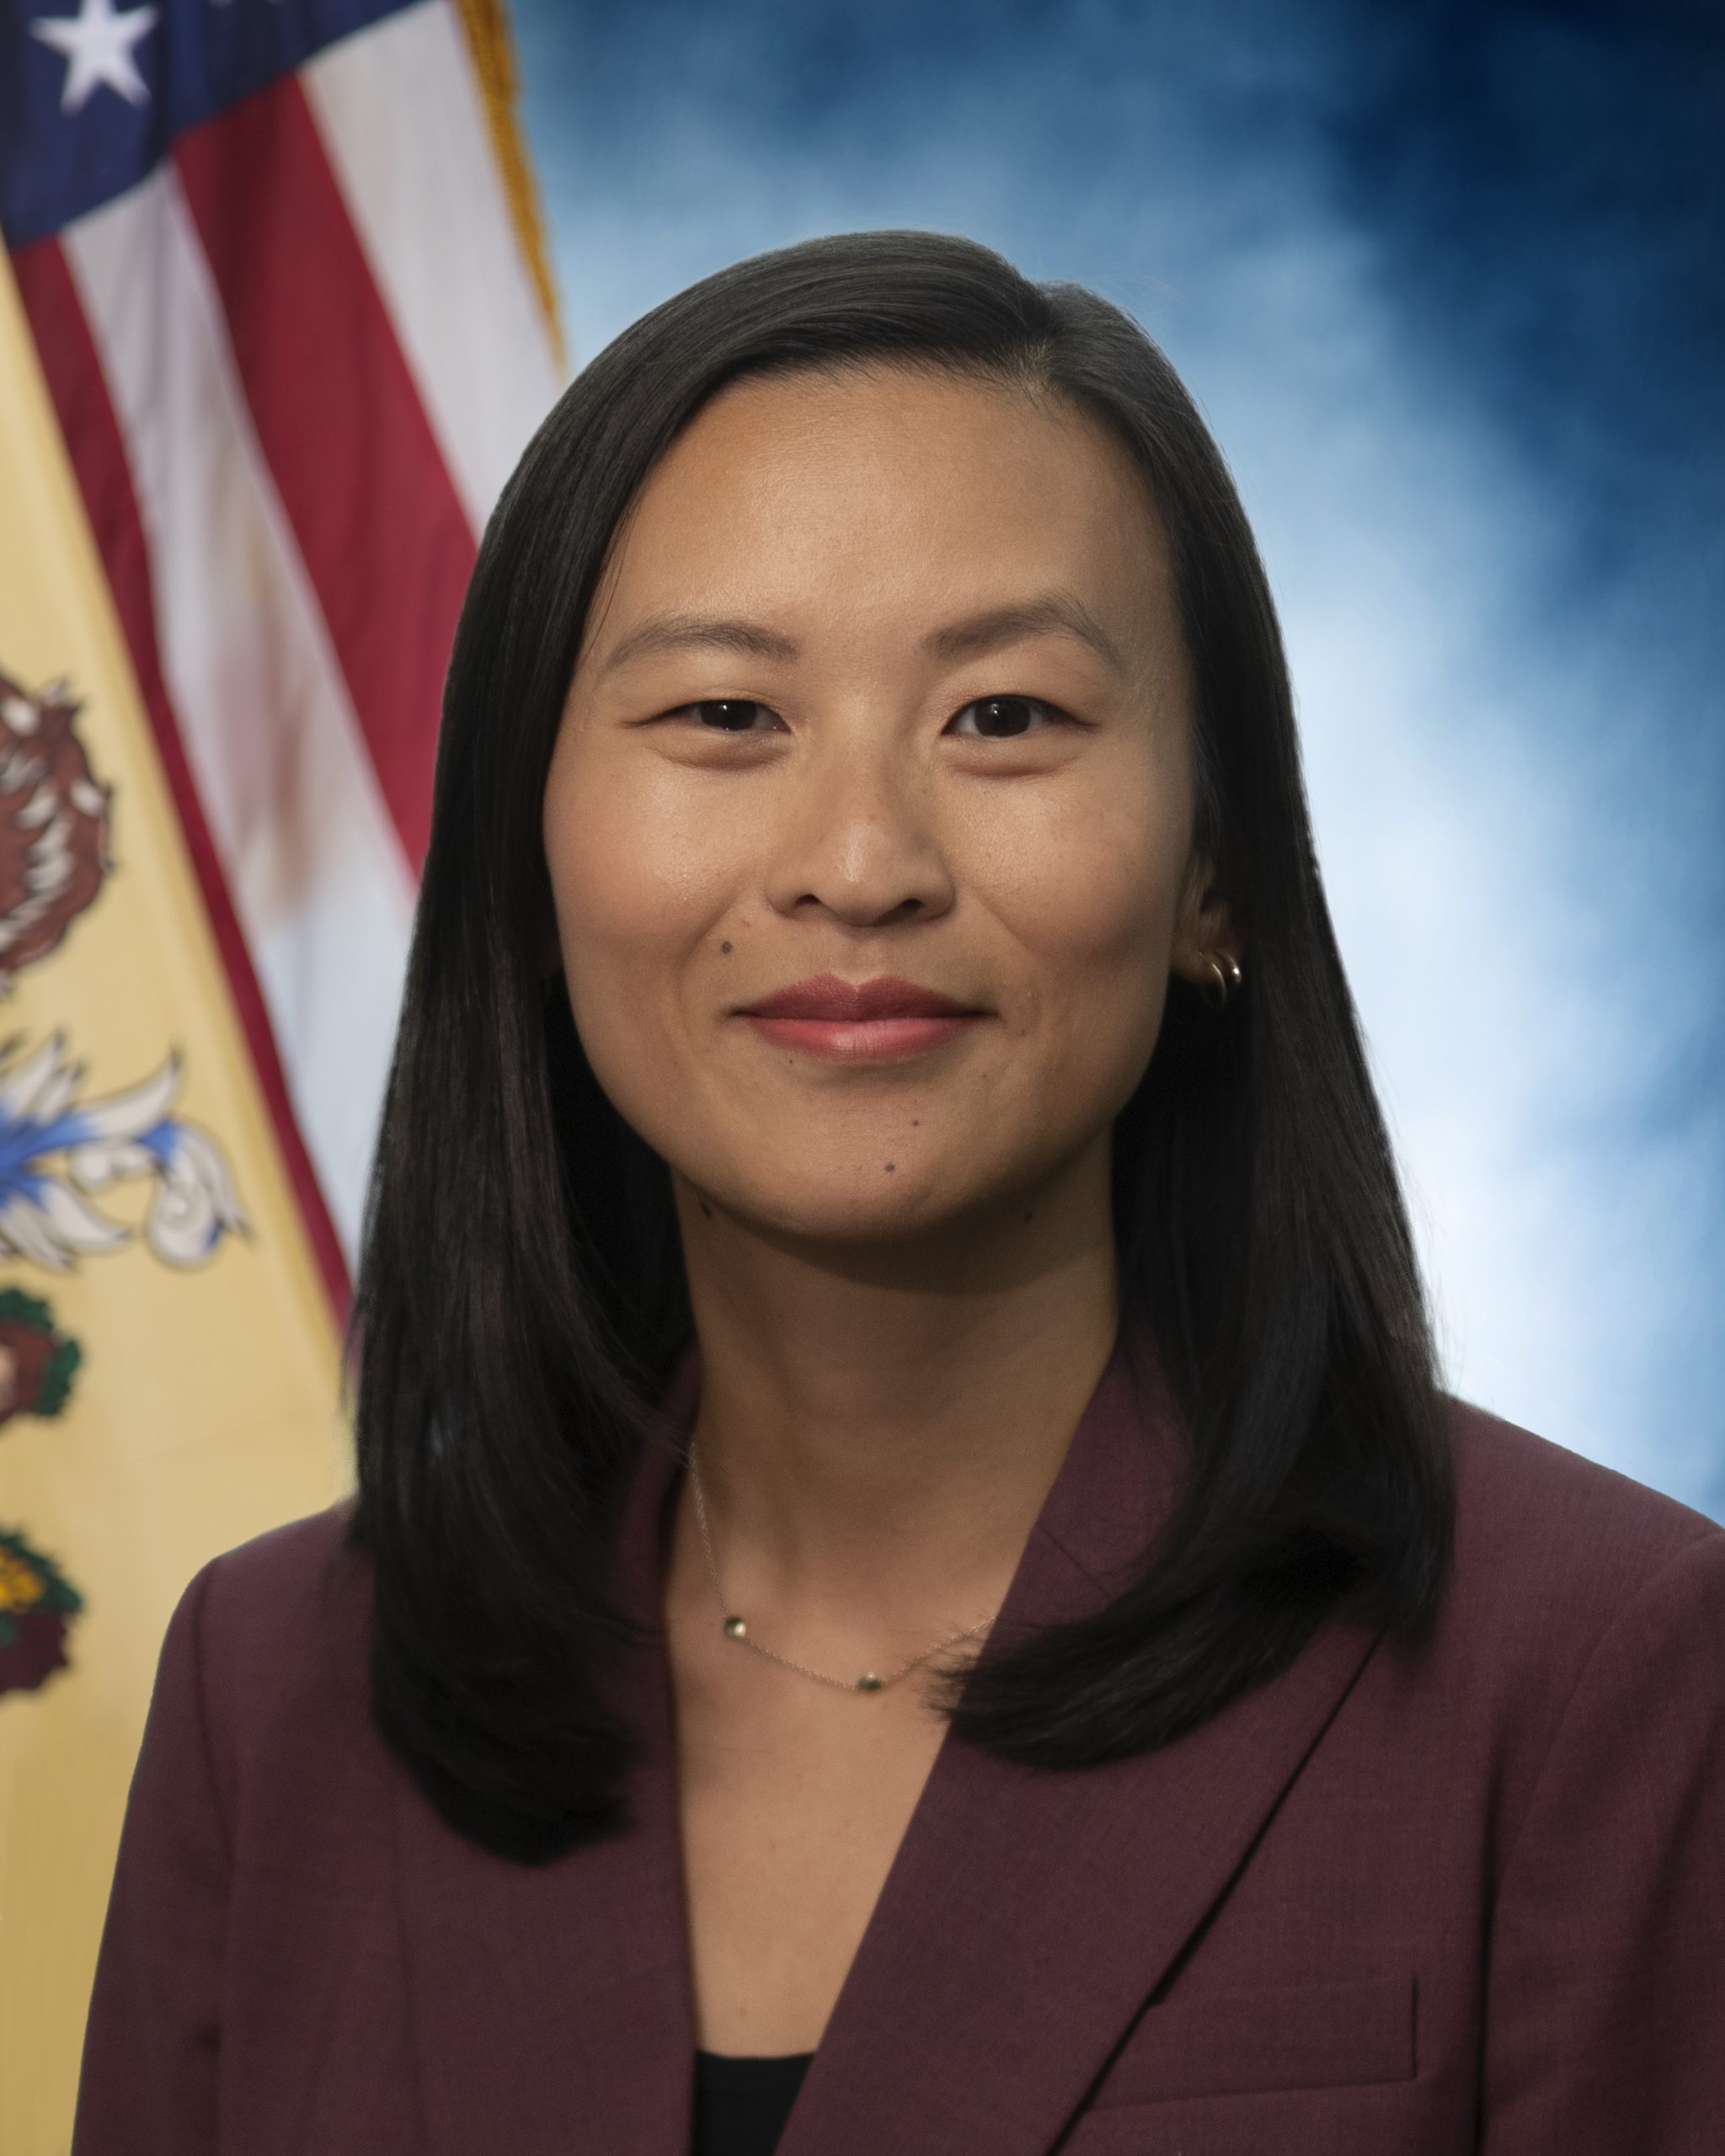 </p>
<h3 style="color:white;">Angela Cai</h3>
<h5 style="color:white;font-style:italic;">Deputy Solictor General</h5>
<p>